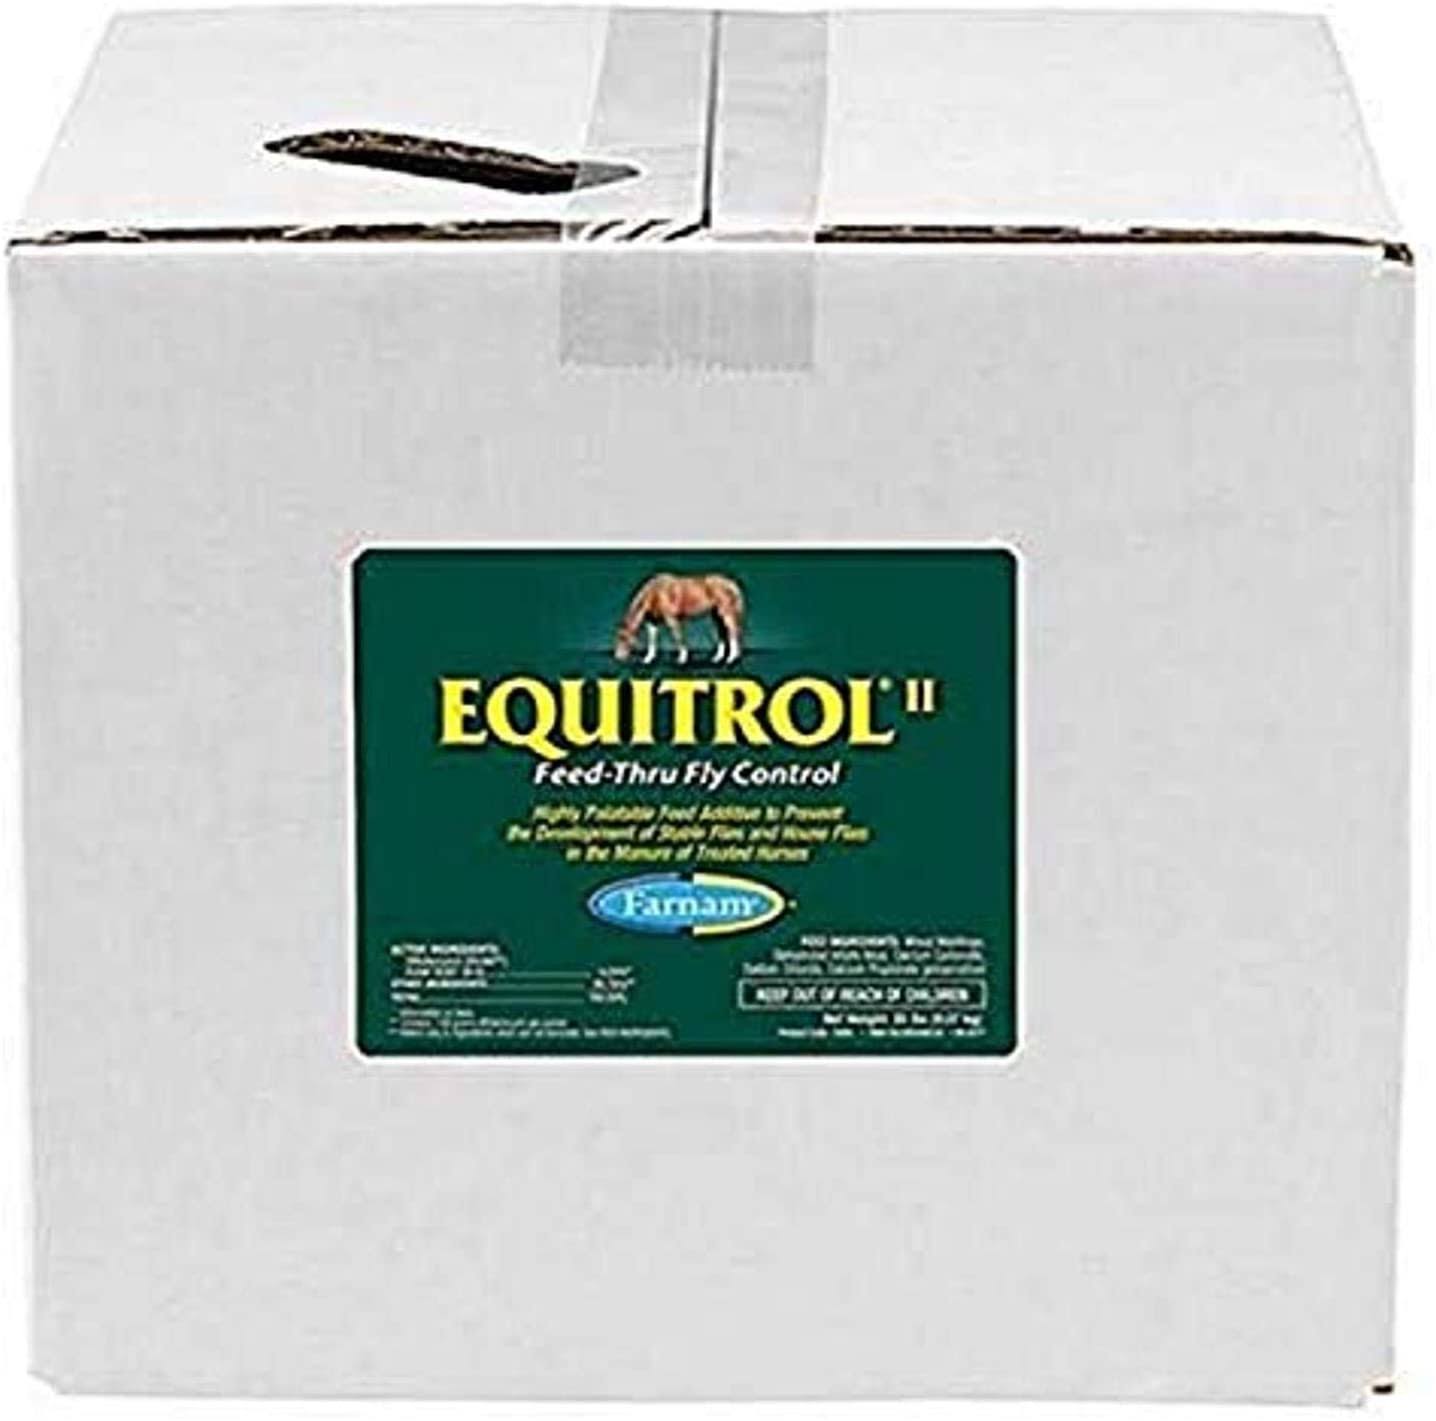 Equitrol II Feed-thru Fly Control For Horses | Horses | Free Shipping On All Orders | Best Price Guarantee | 30 Day Money Back Guarantee